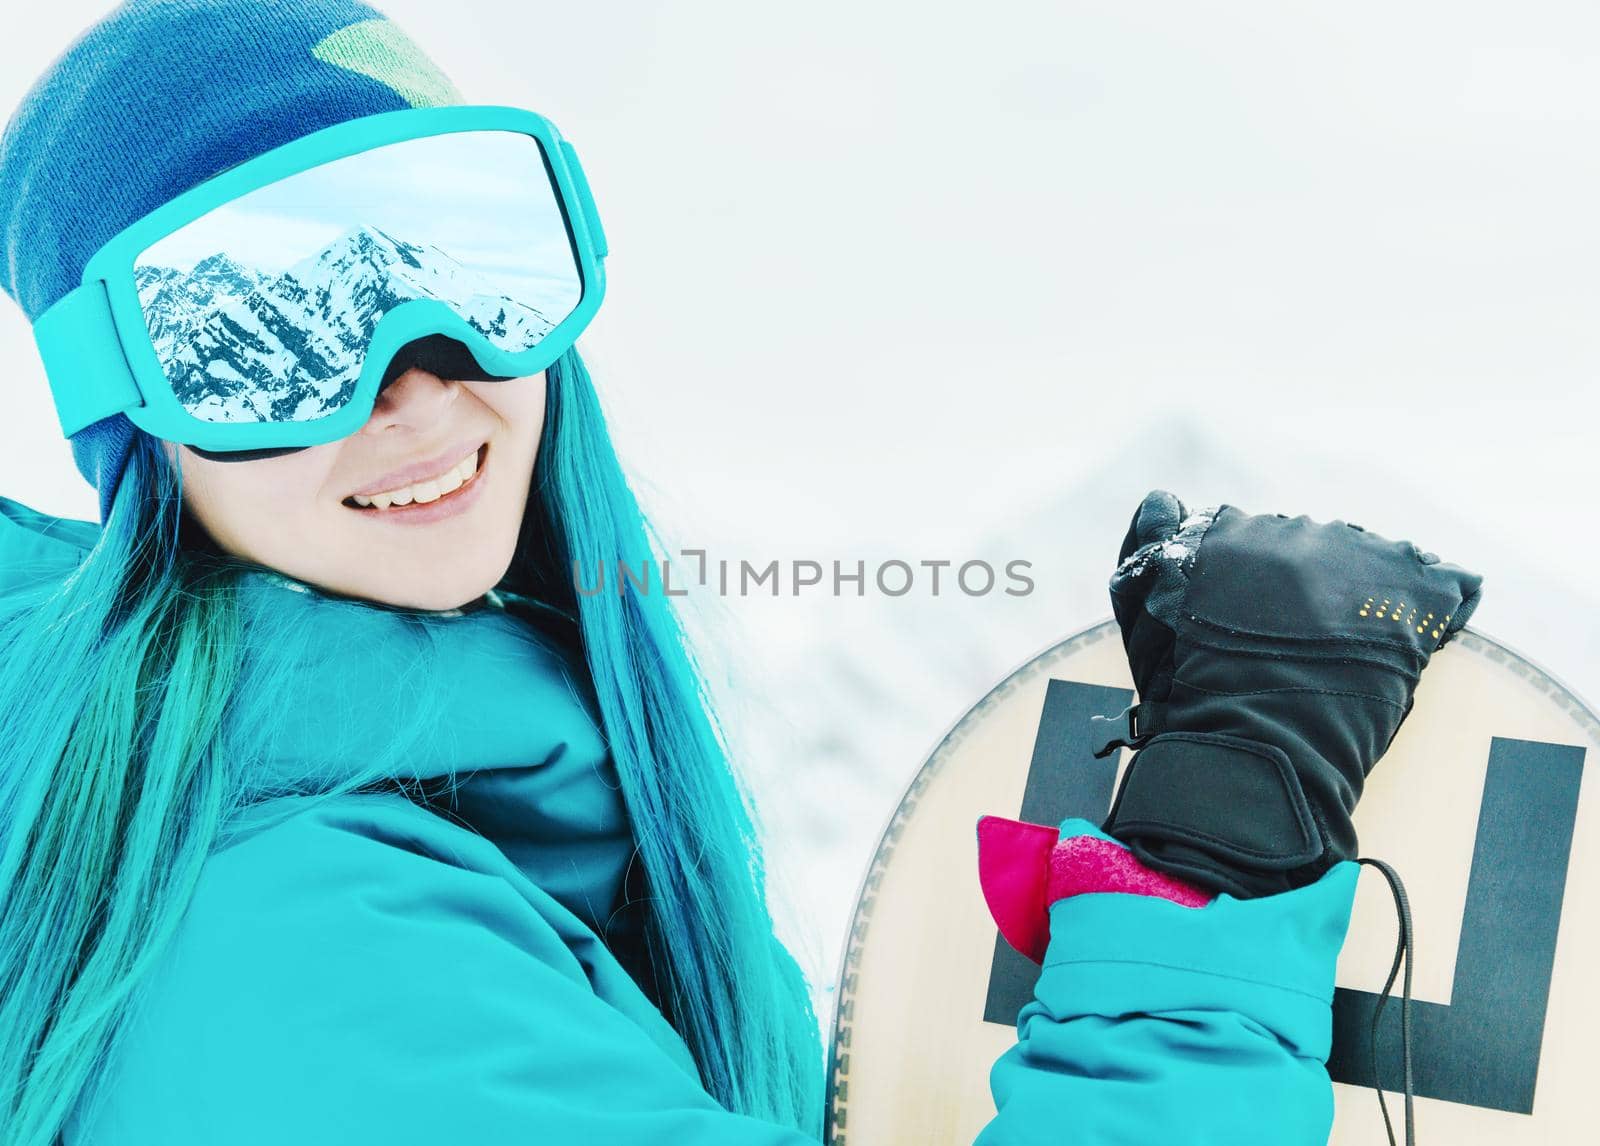 Smiling young woman with blue hair in protective sunglasses standing with snowboard, looking at camera. Snow mountains reflected in glasses.